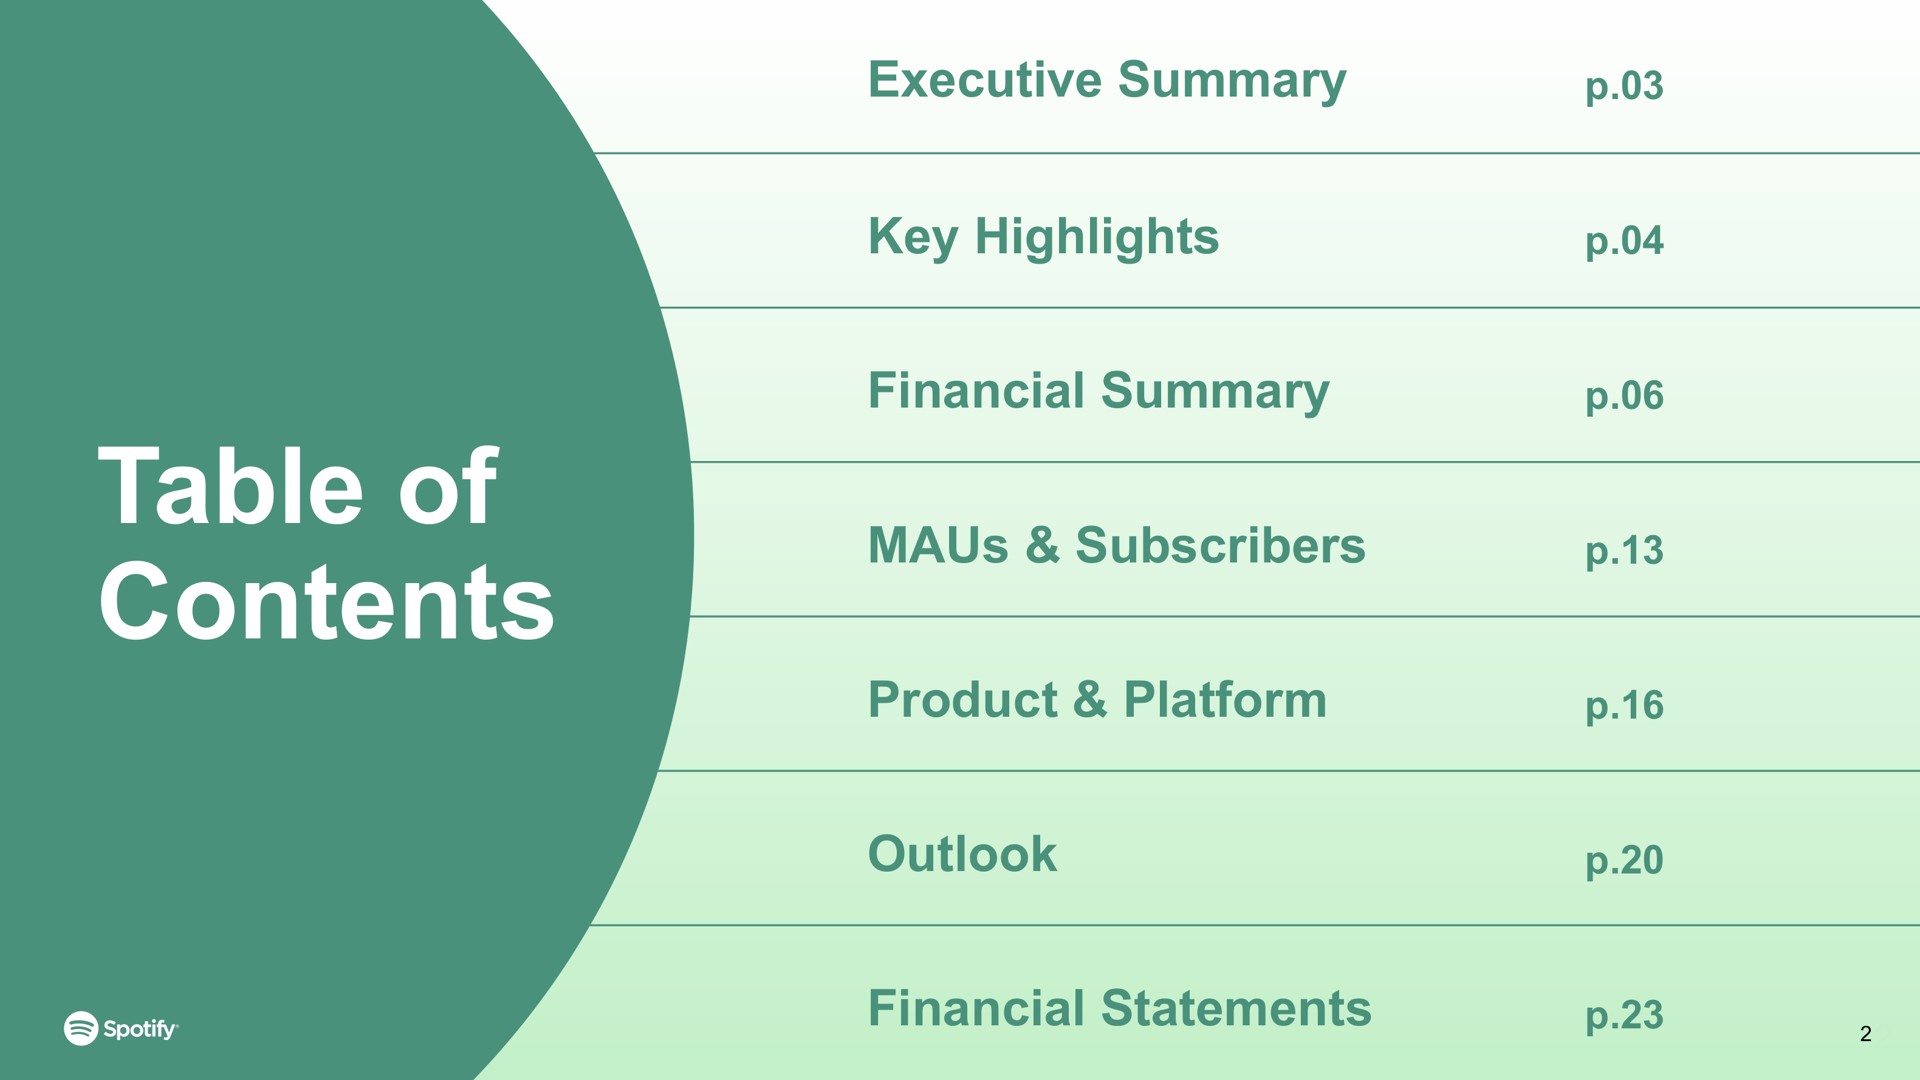 table of contents executive summary key highlights financial summary subscribers product platform outlook financial statements | Spotify